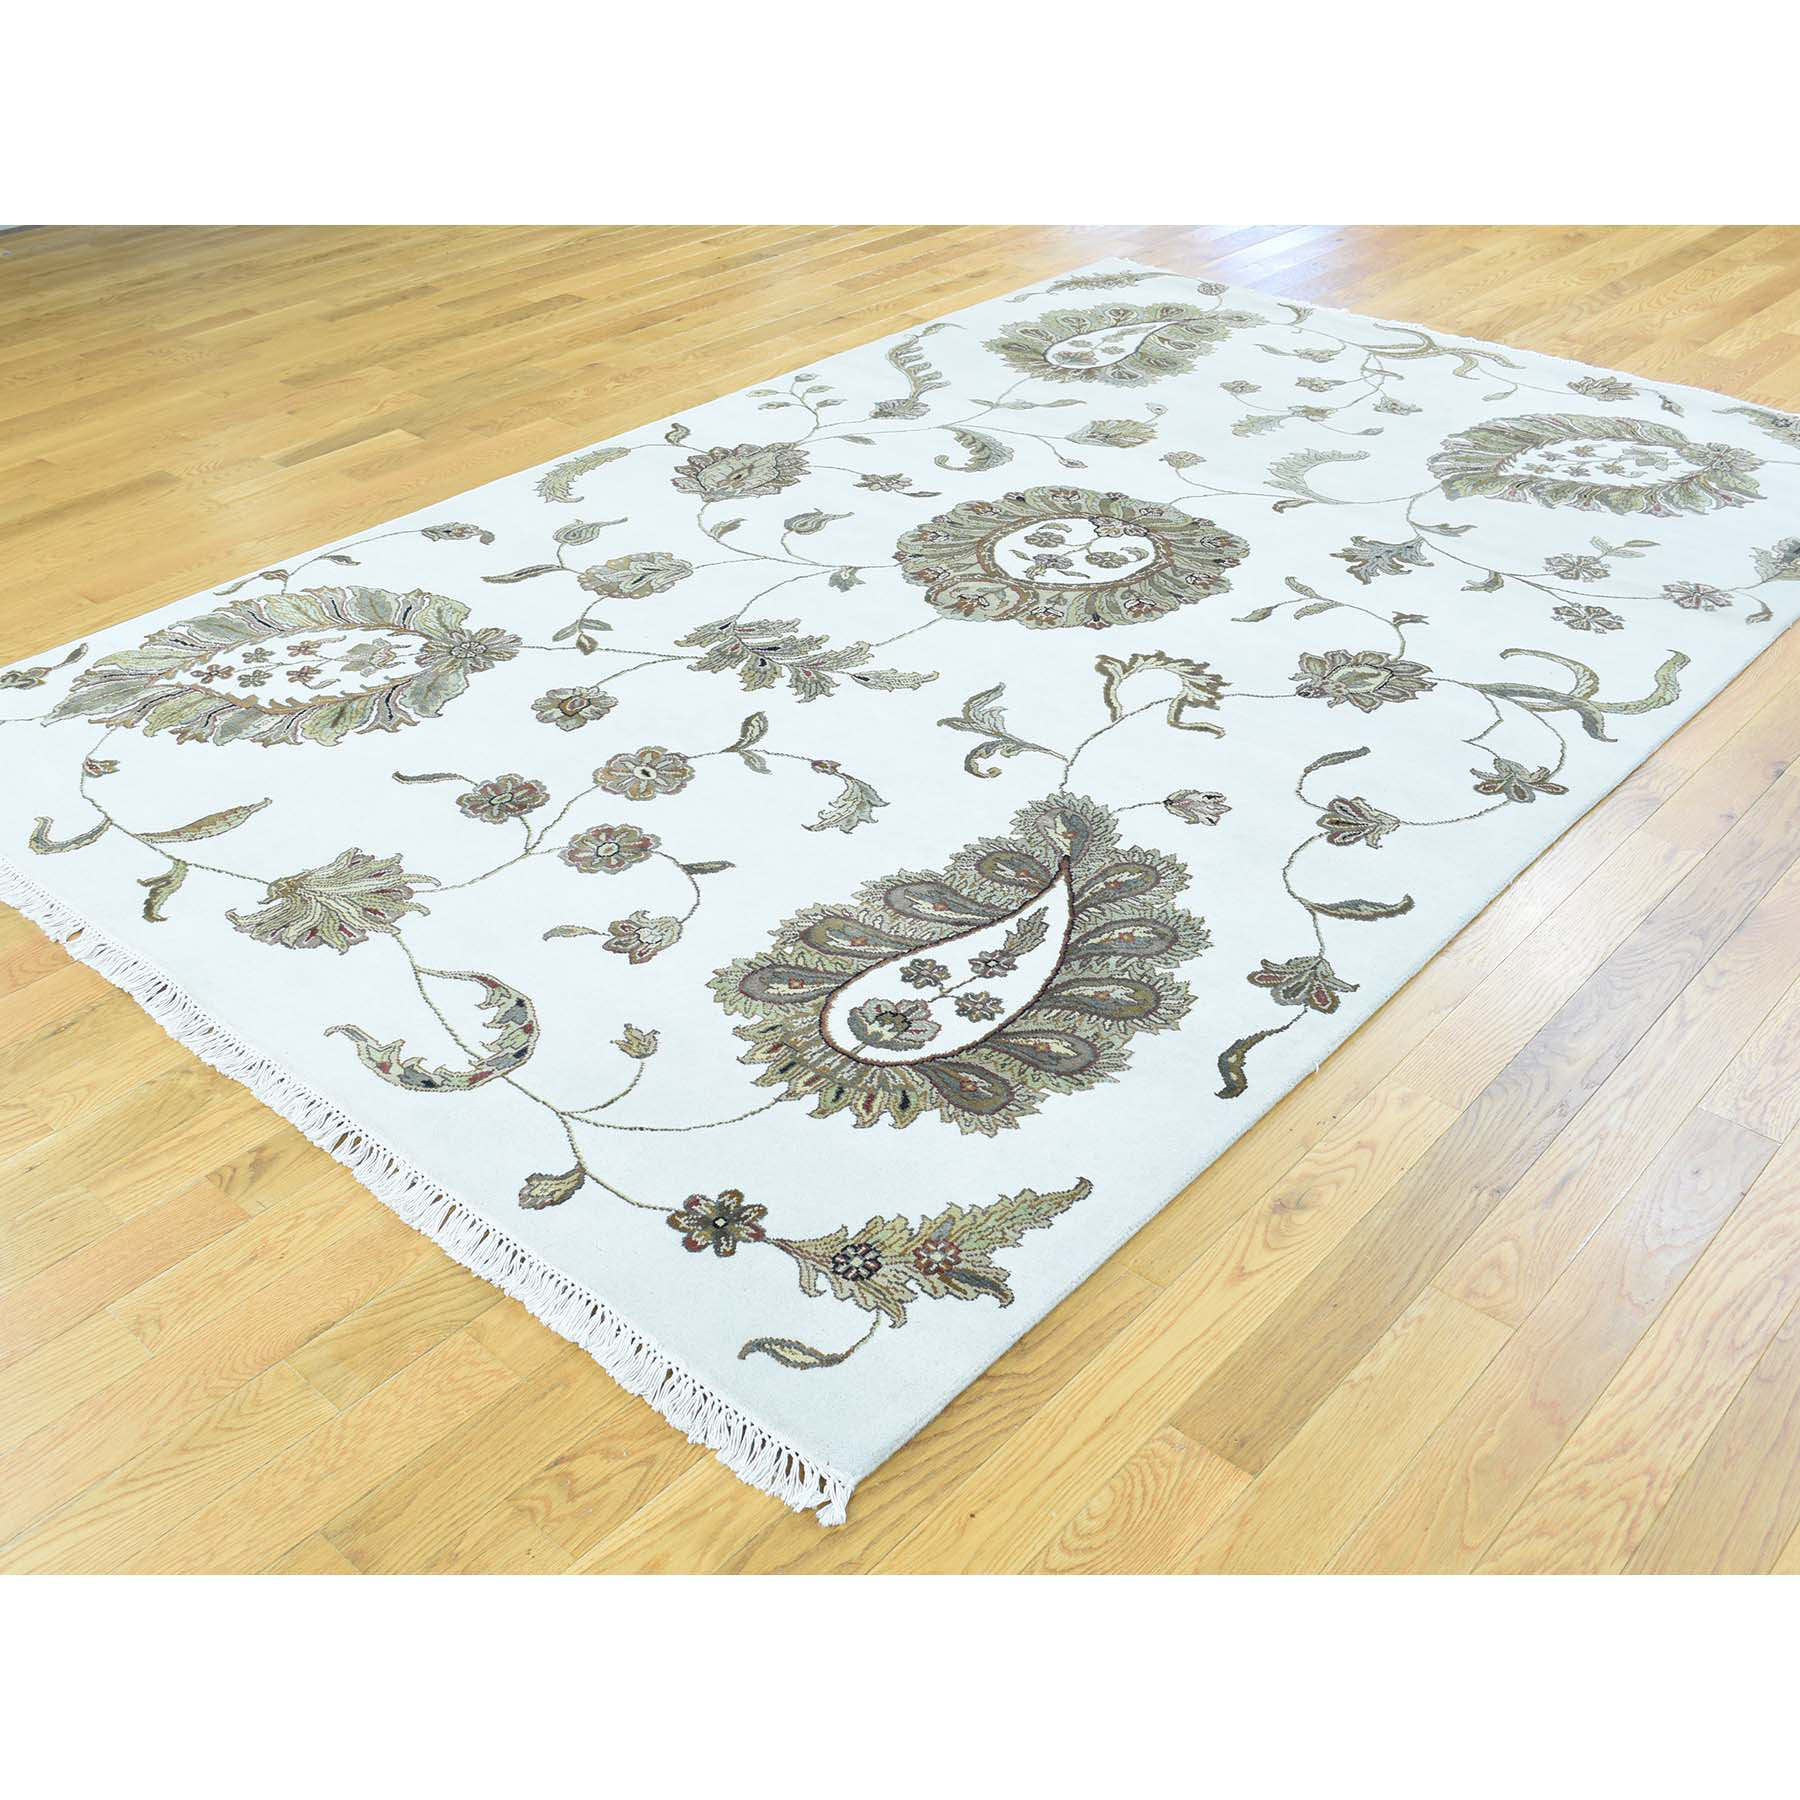 6-x9-2  On Clearance Modern Transitional No Border Wool And Silk Hand-Knotted Rug 